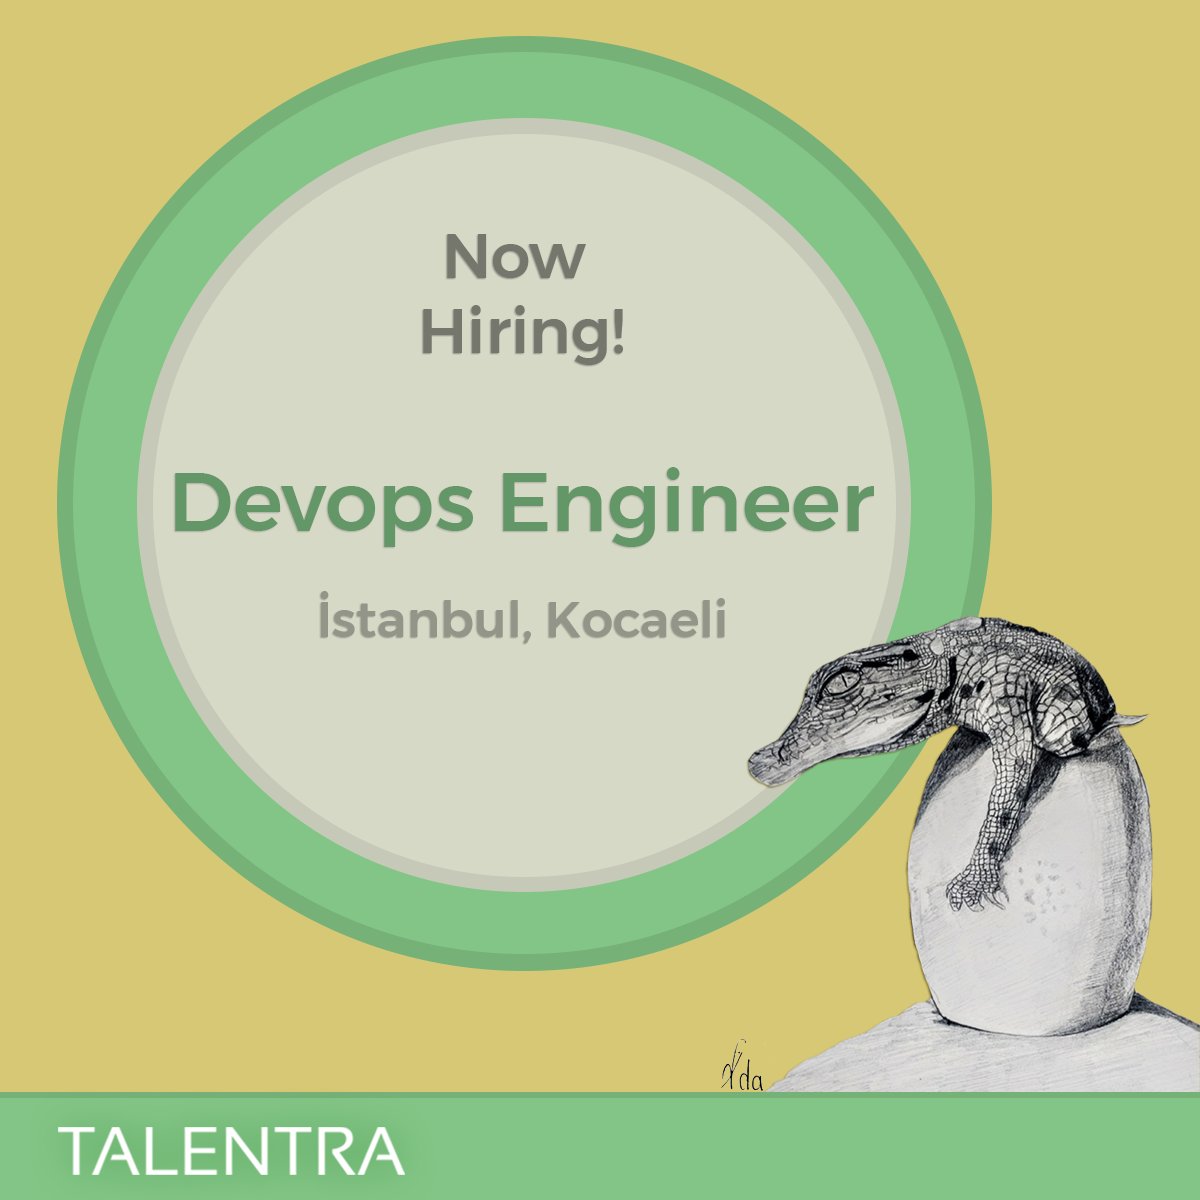 We are looking for a DevOps Engineer for our Business Partner which is one of the next generation car manufacturer companies. To Apply: talentra.net/Jobs/Detail/de… #nowhiring #işilanı #jobsearch #İstanbul